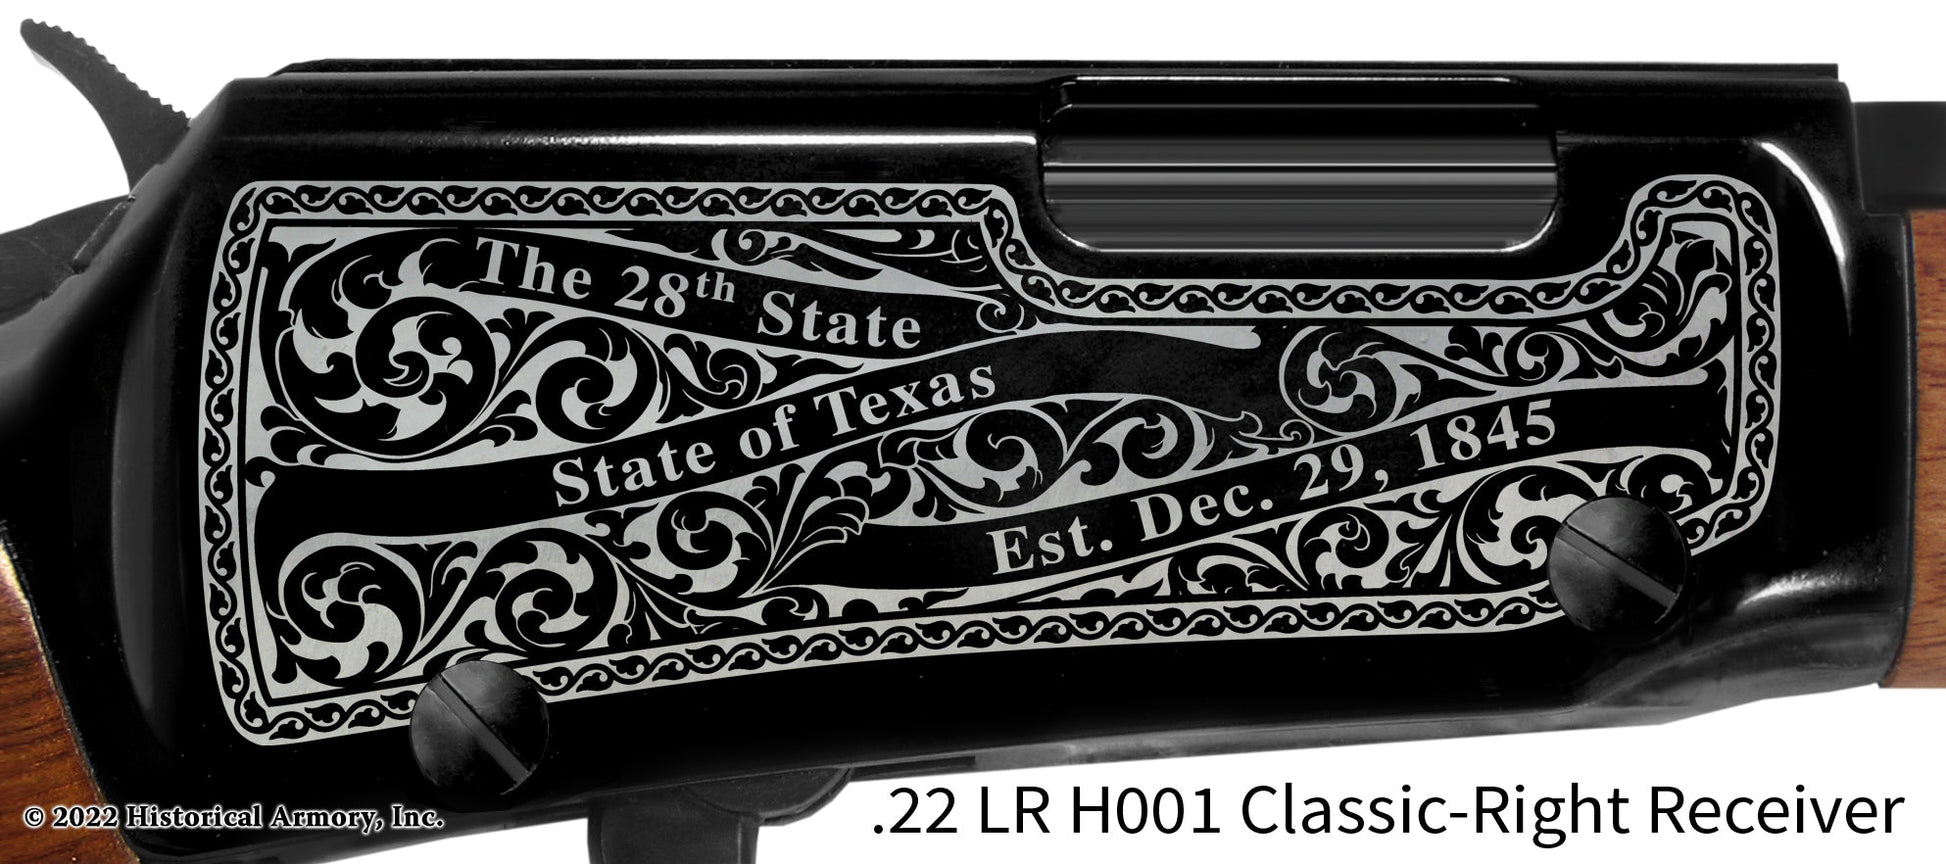 Dallas County Texas Engraved Henry H001 Rifle